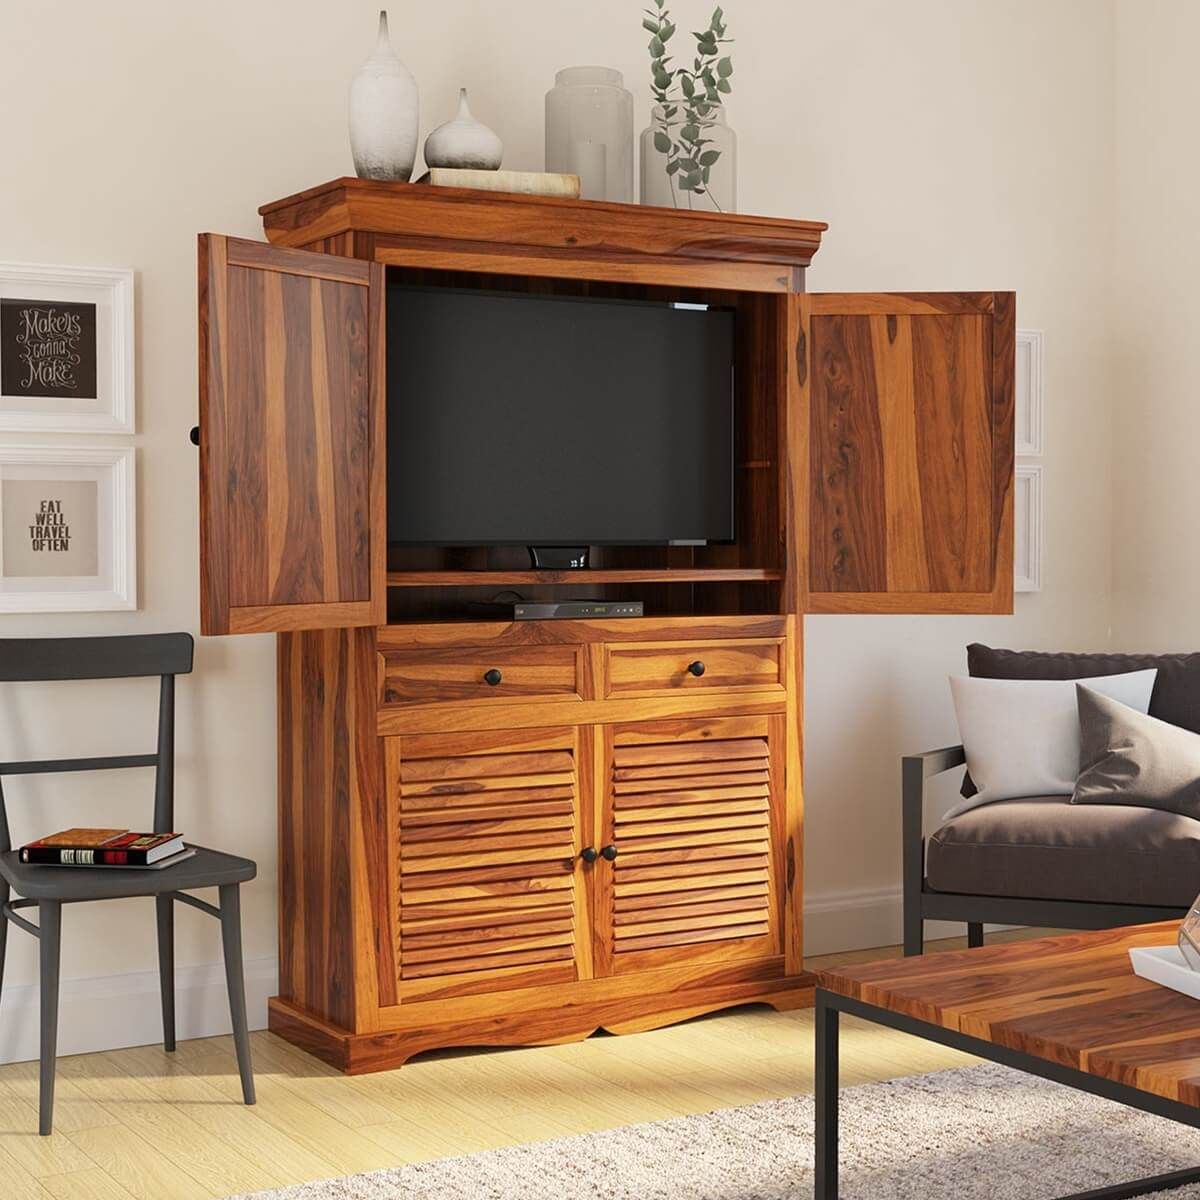 Tanay Louvered Doors Rustic Large Solid Wood Tv Armoire Throughout Oak Tv Cabinet With Doors (View 3 of 15)